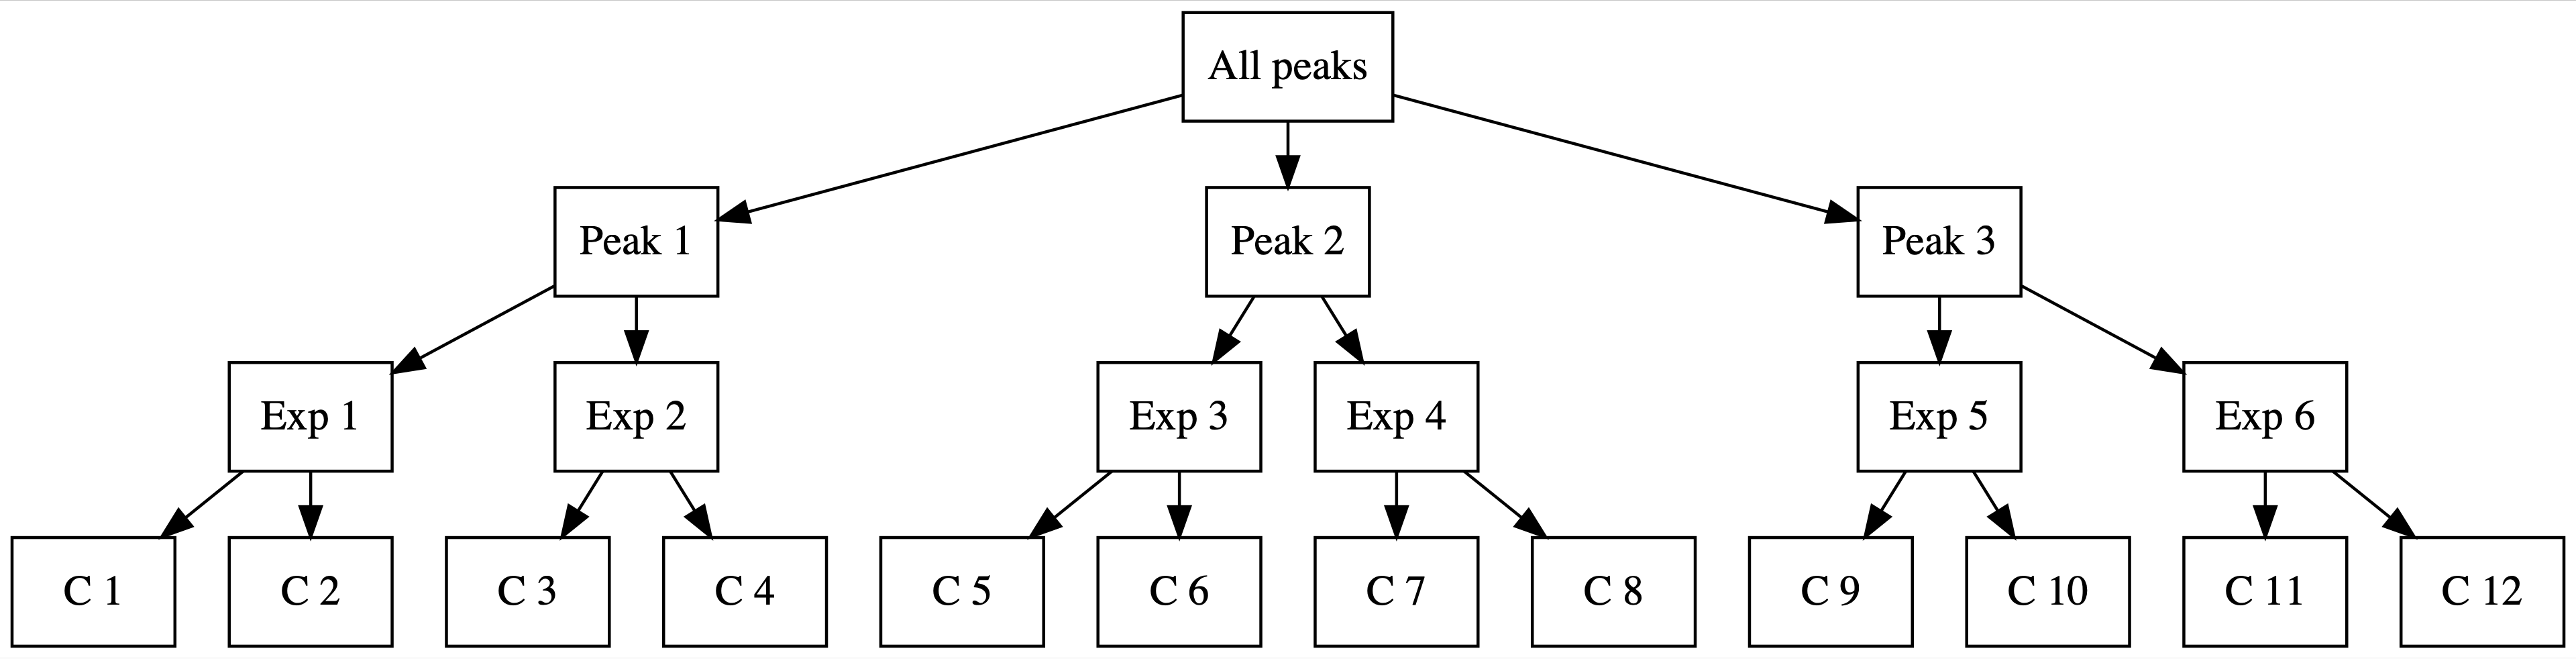 A flow chart. At the top is a box labeled All Peaks. Out of this box are 3 different arrows leading to boxes labeled Peak 1, Peak 2, and Peak 3. Out of each of these boxes are 3 different arrows leading to bubbles representing 3 unique expeditions on each peak. Out of each of these bubbles are 3 more bubbles representing 3 unique climbers within each expedition.